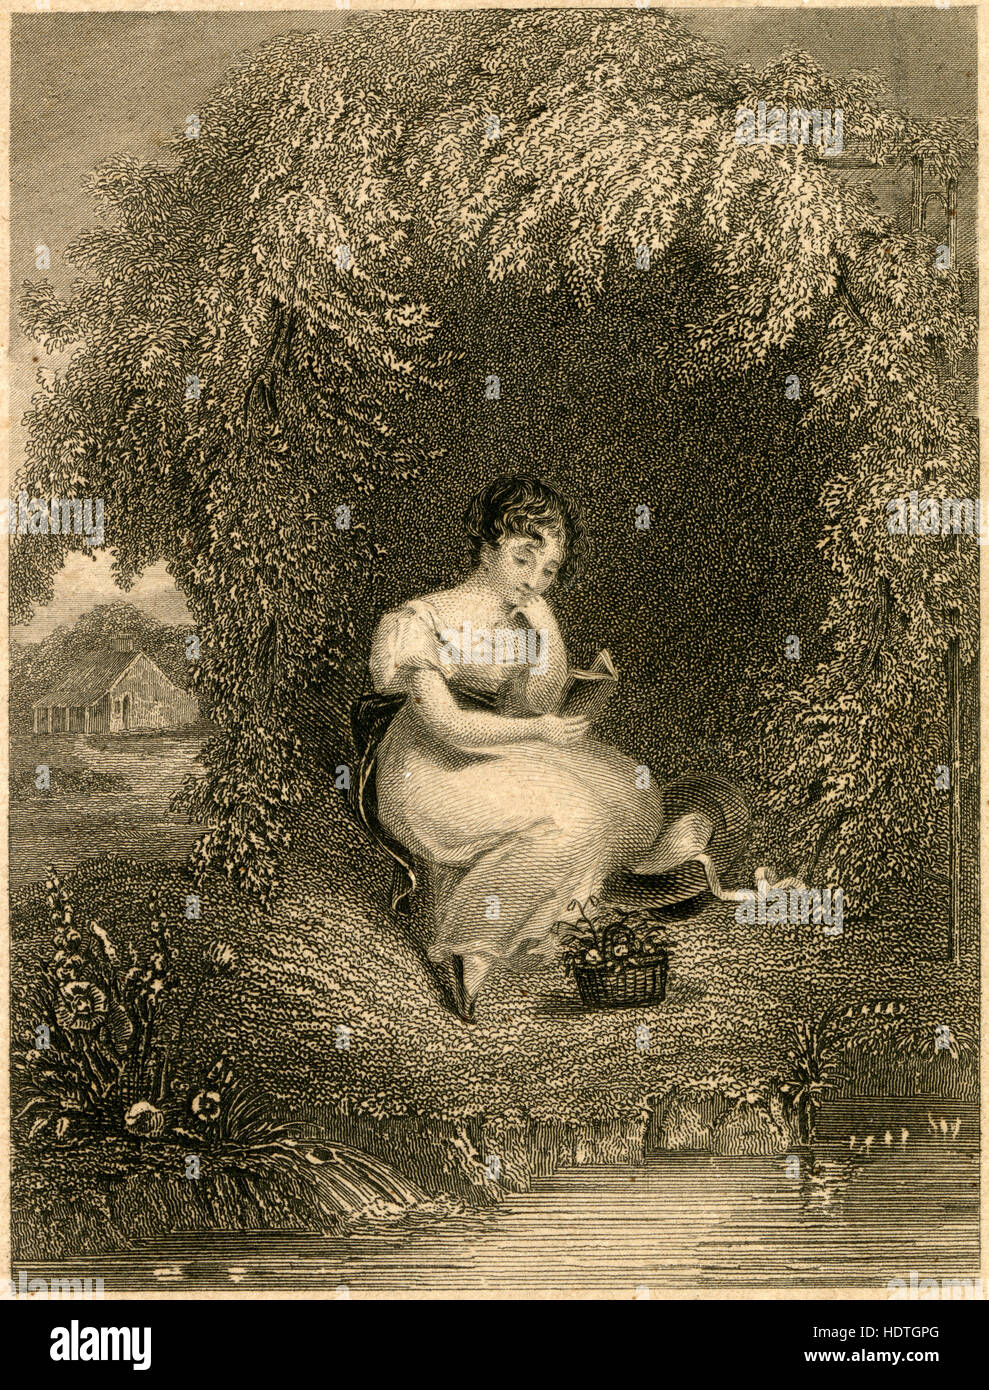 Antique c1840 engraving, The Flower Garden. 'Next after the blessed bible, a flower garden is to me the most eloquent of books—a volume teeming with instruction, consolation, and reproof' from 'The Snow-drop' by Charlotte Elizabeth. Charlotte Elizabeth Tonna (1790-1846) was a popular Victorian English writer and novelist who wrote as Charlotte Elizabeth. SOURCE: ORIGINAL ENGRAVING. Stock Photo